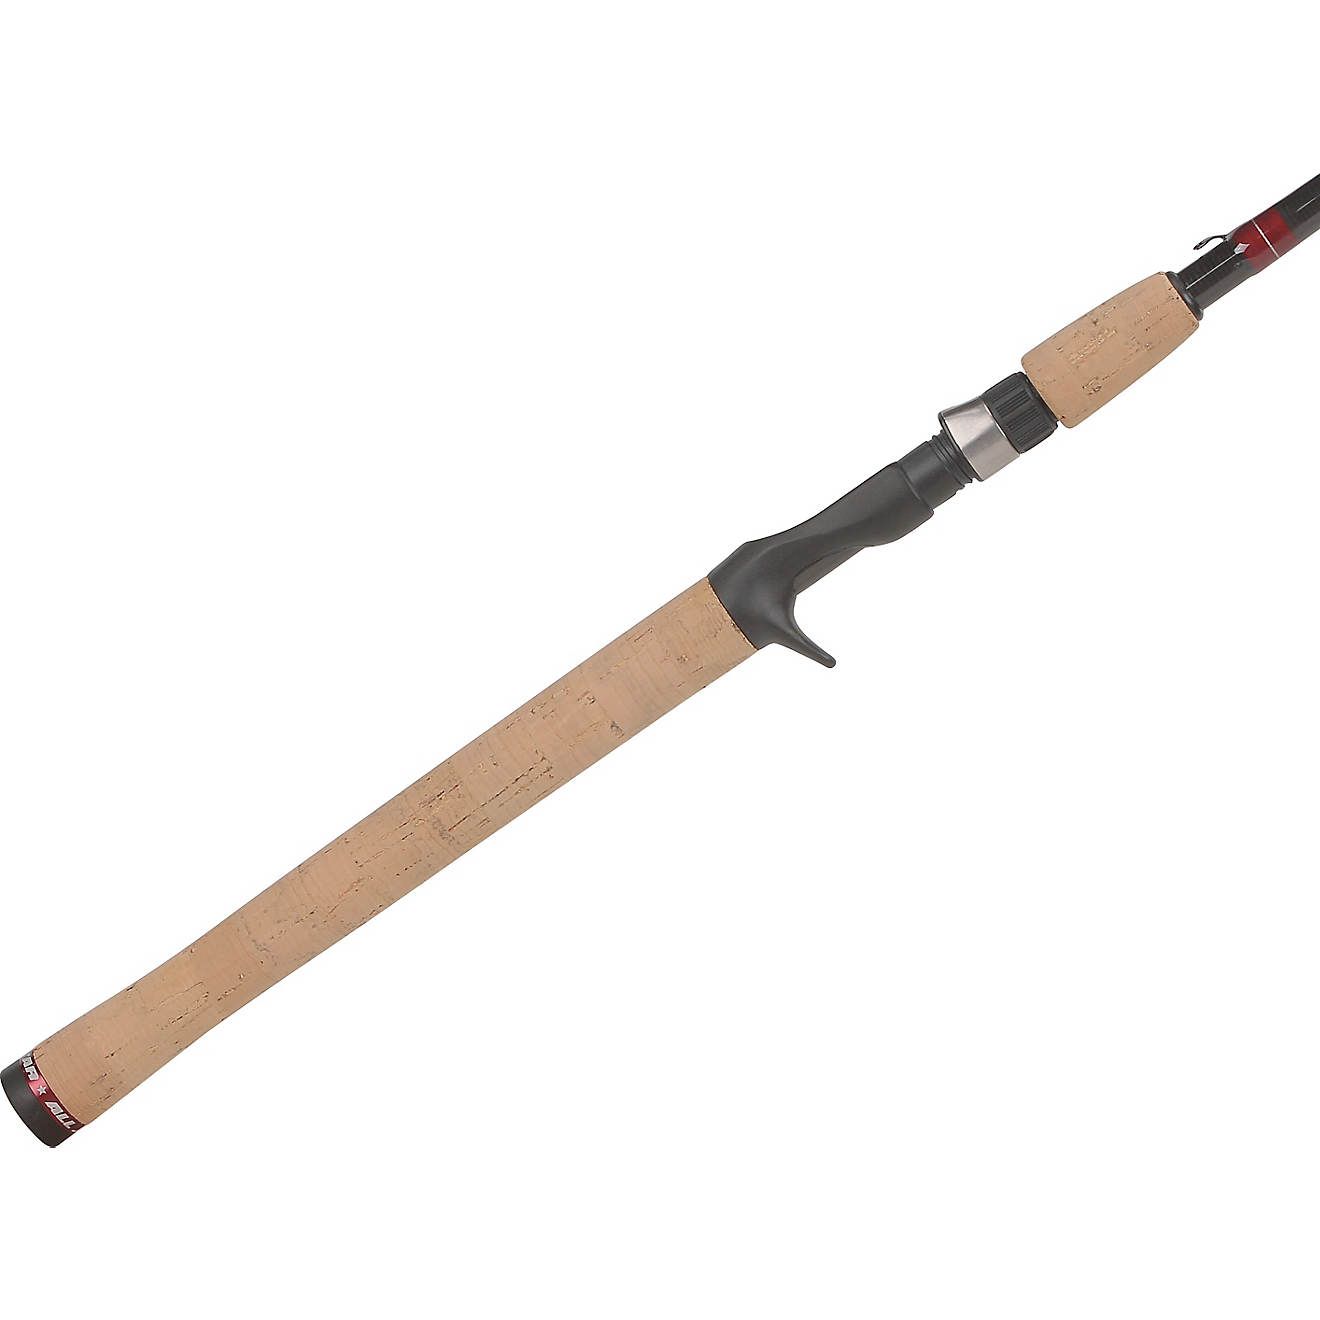 All Star Classic Series Casting Rod | Academy Sports + Outdoor Affiliate